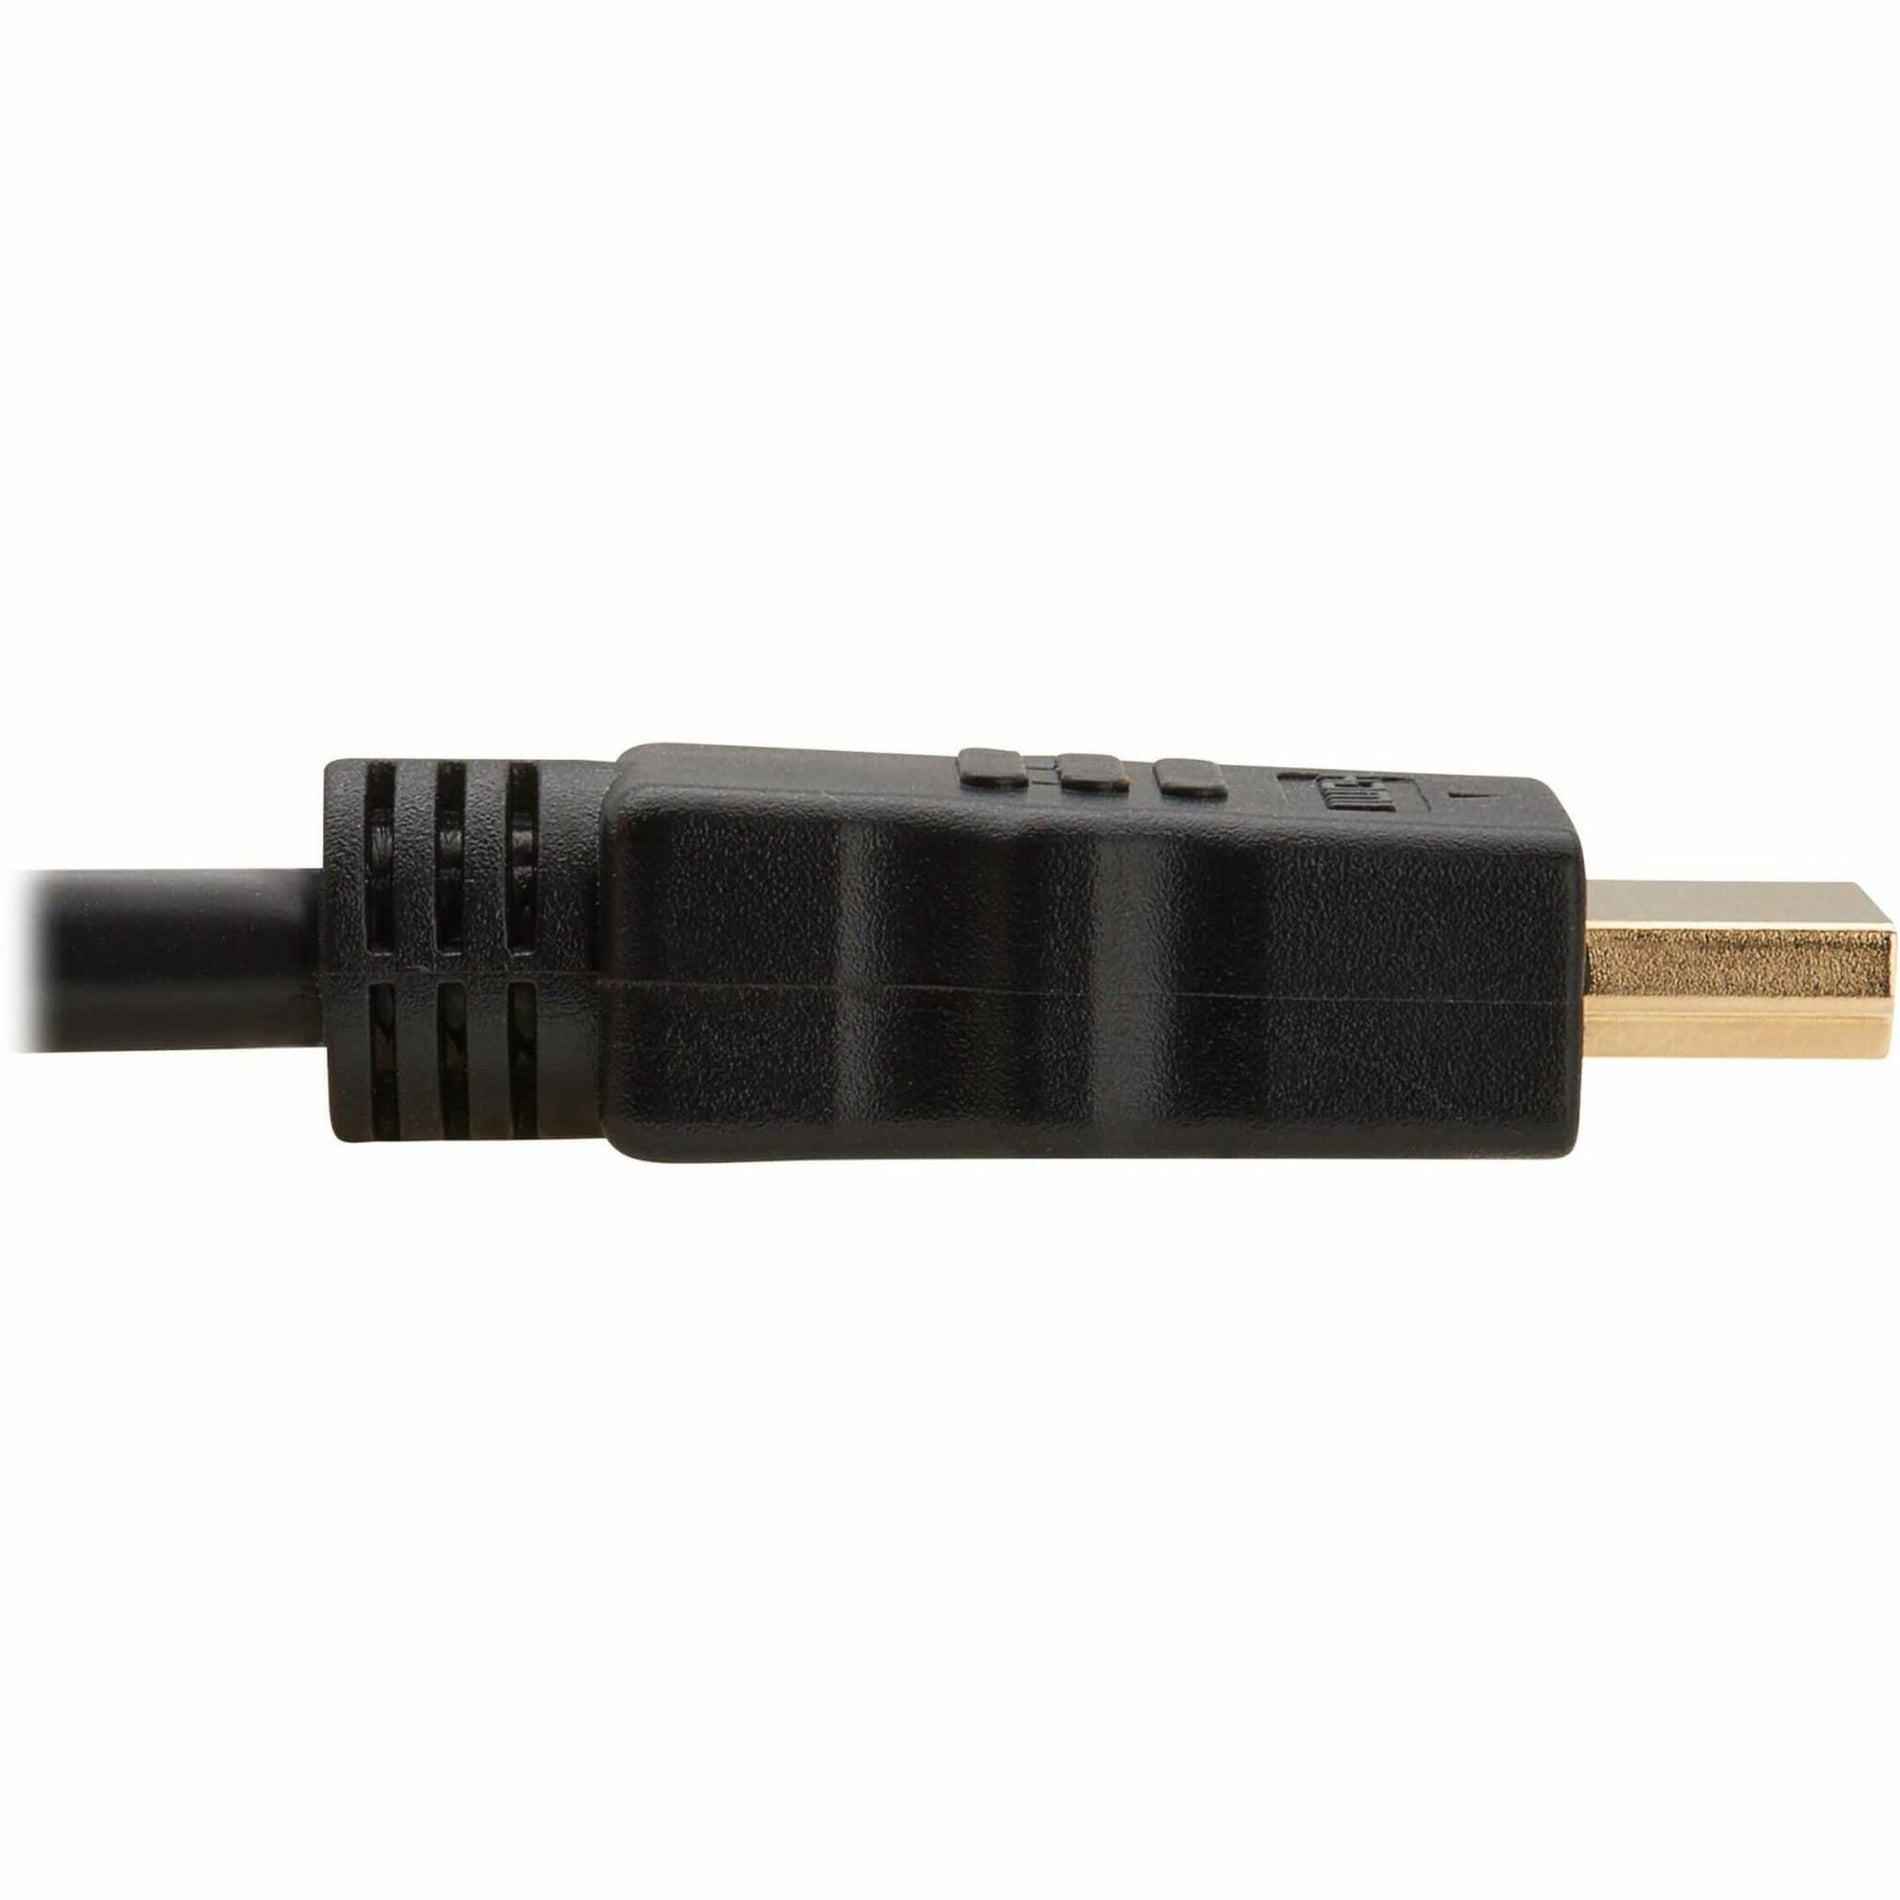 Tripp Lite P568-100 HDMI Gold Digital Video Cable, 100 ft, High-Quality Connection for Digital Displays